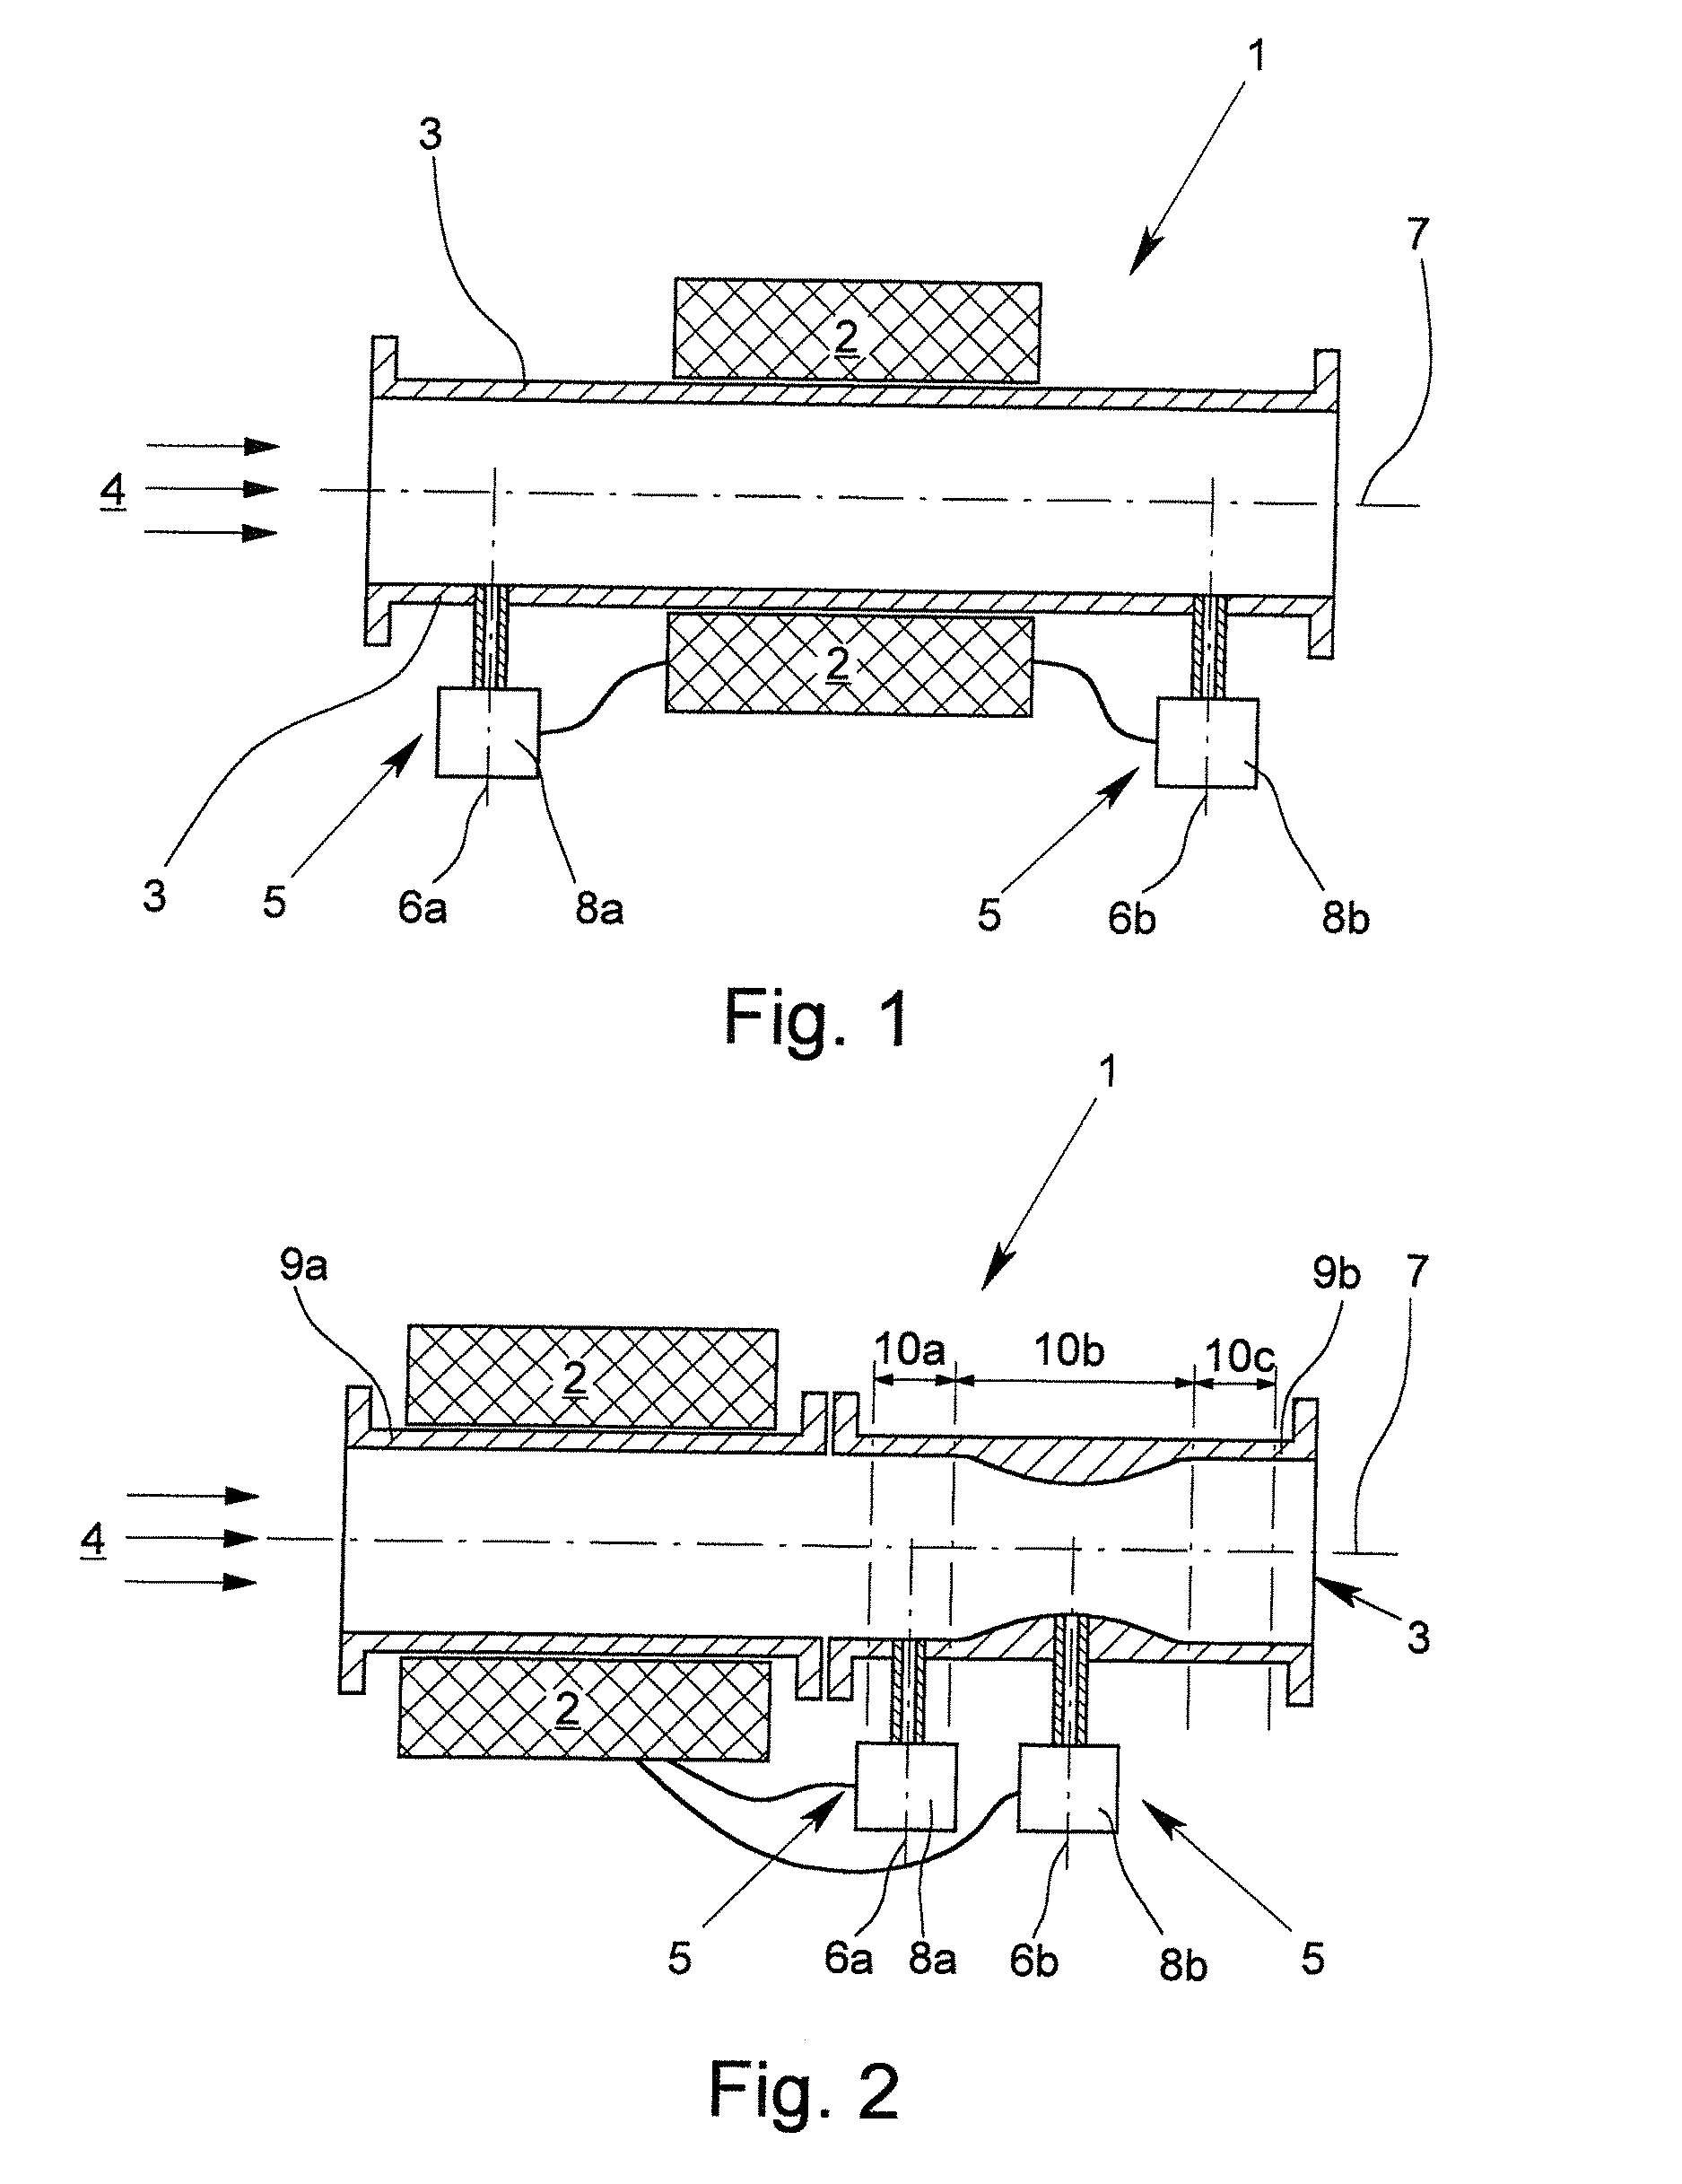 Nuclear magnetic flow meter and method for operation of nuclear magnetic flow meters with an additional measuring device operating on a different principle